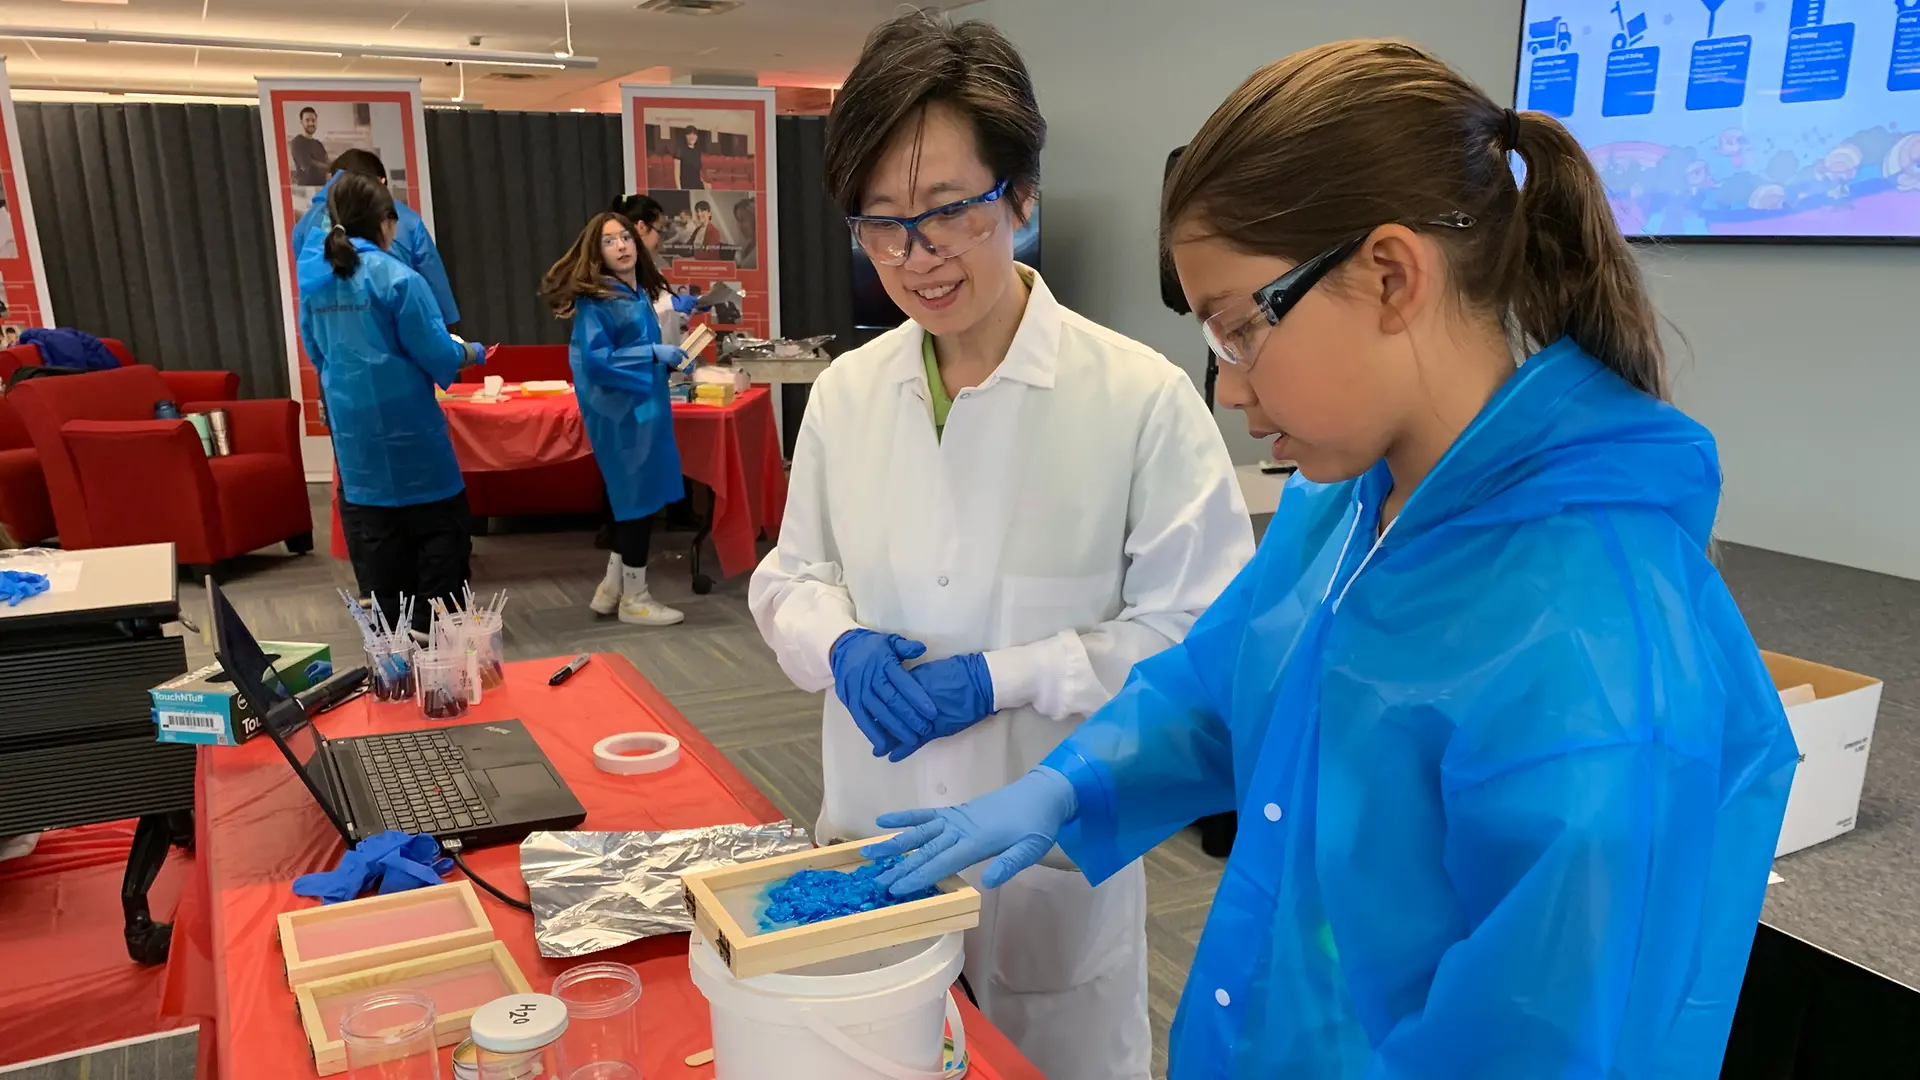 Principal Scientist Alice Cheung and Product Optimization Manager Alexis Kriegl are Inspiring Future Pioneers through STEM Education